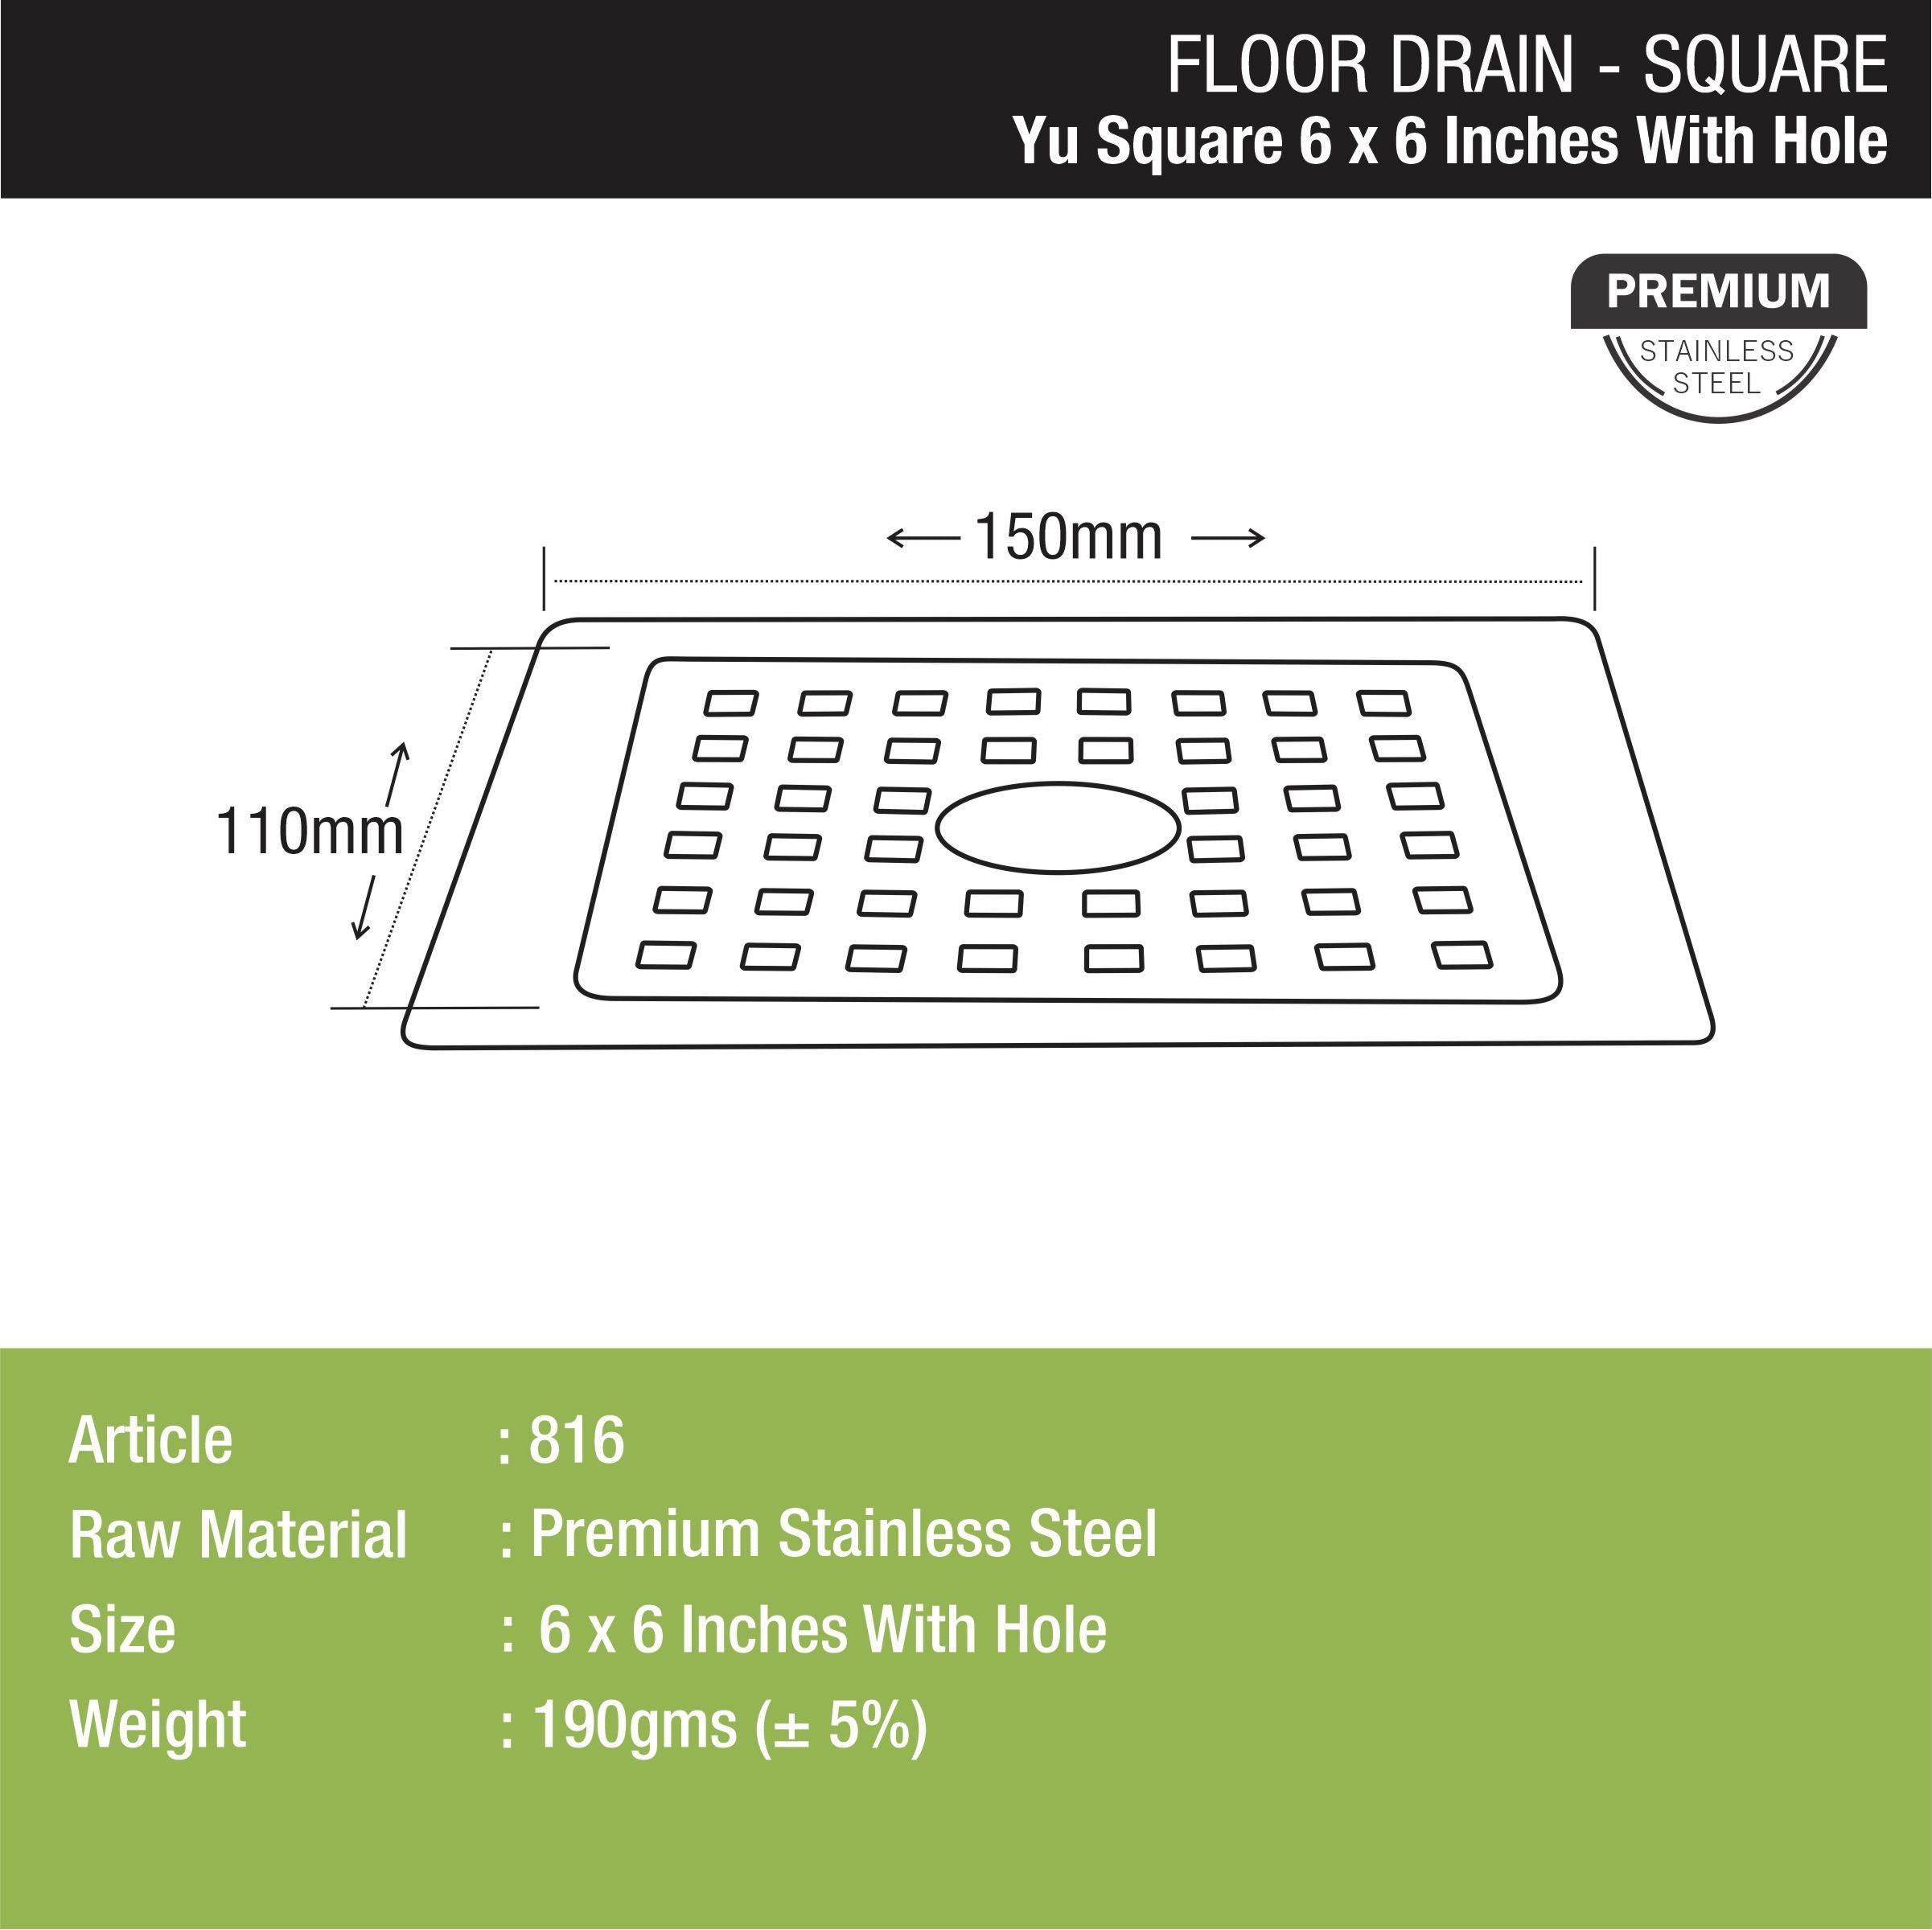 YU Square Floor Drain (6 x 6 Inches) with Hole dimensions